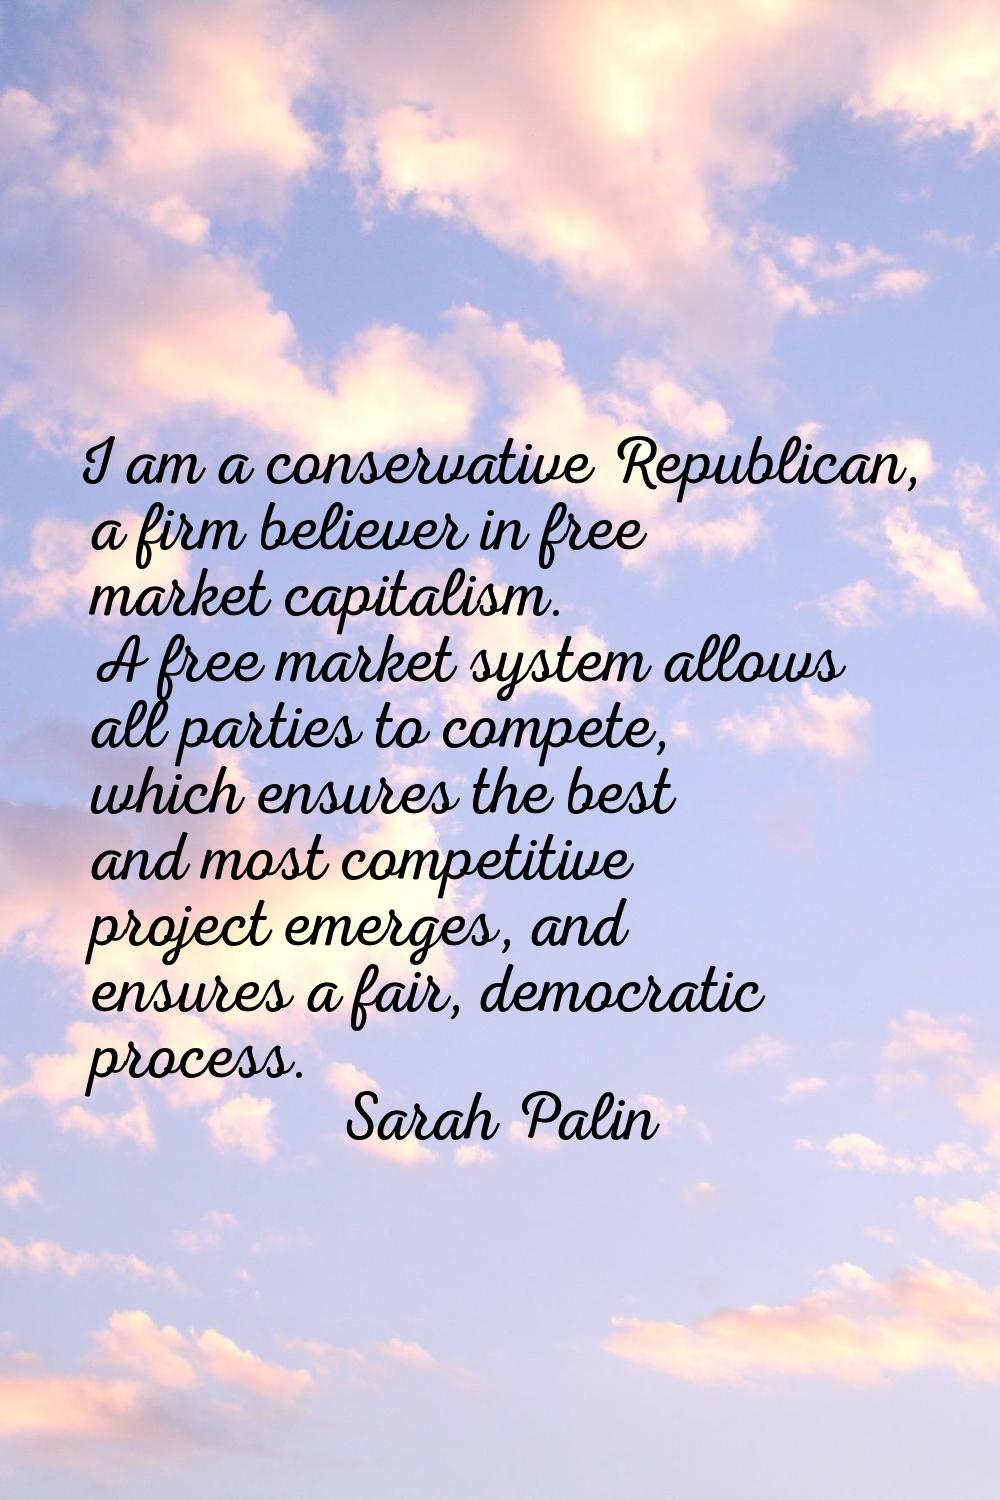 I am a conservative Republican, a firm believer in free market capitalism. A free market system all